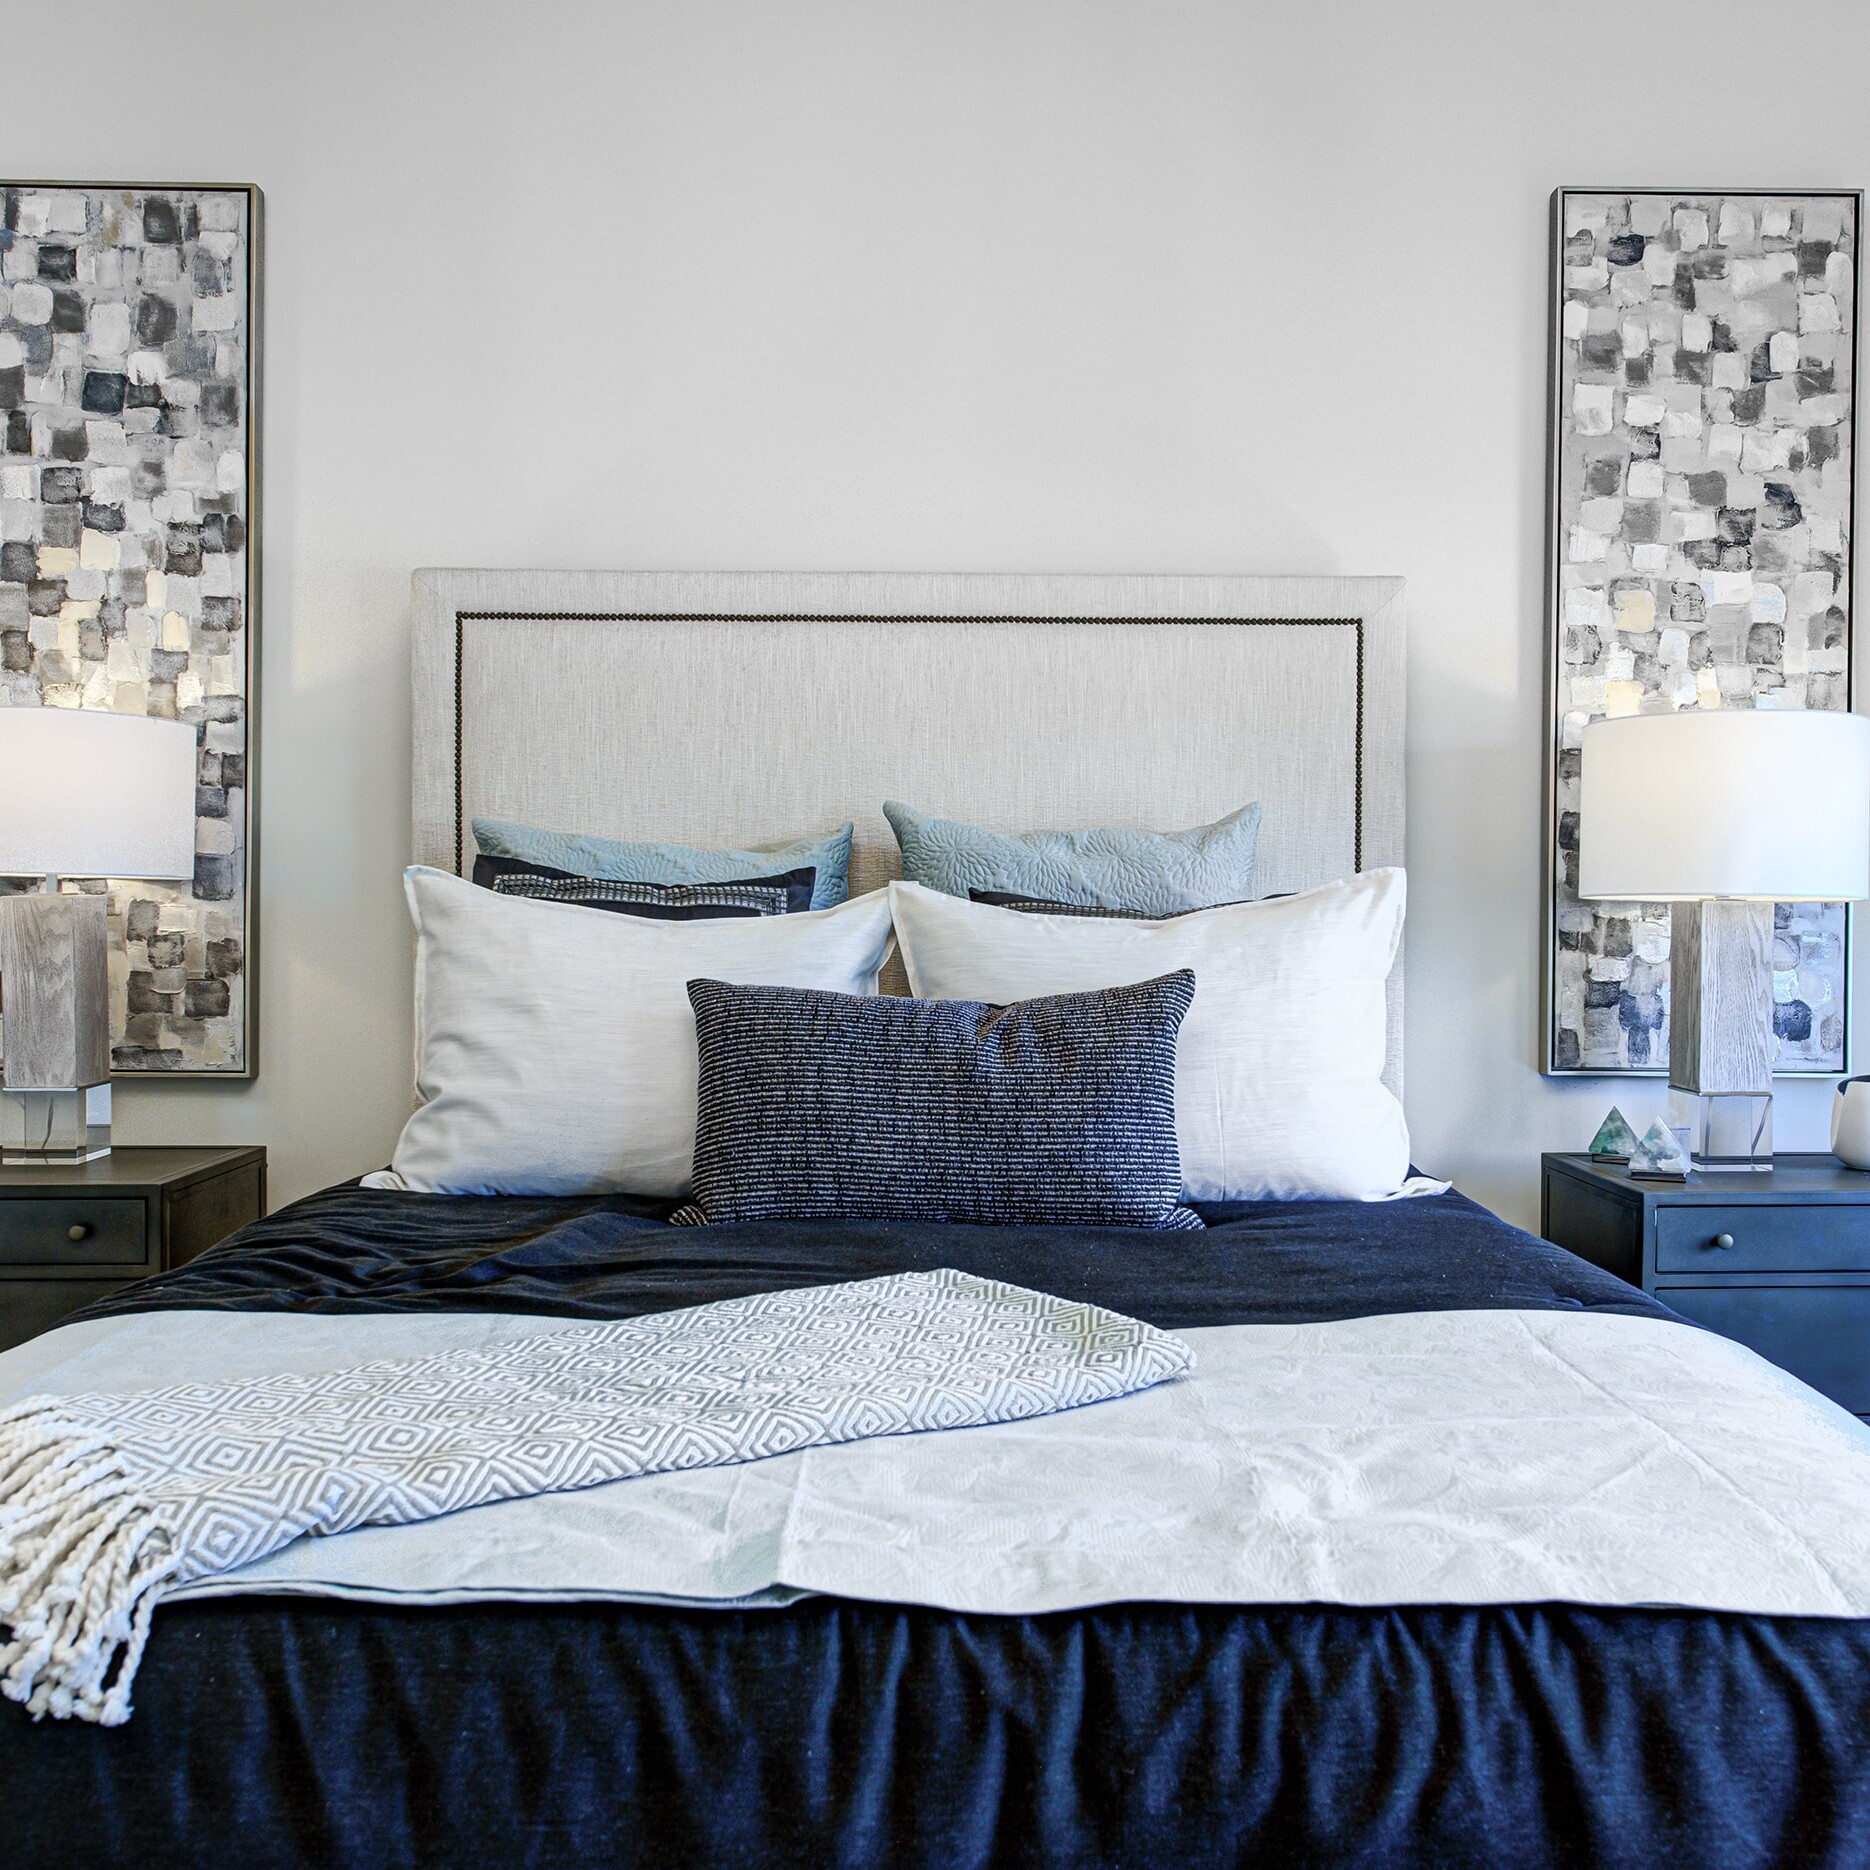 A bed with a blue and white comforter.